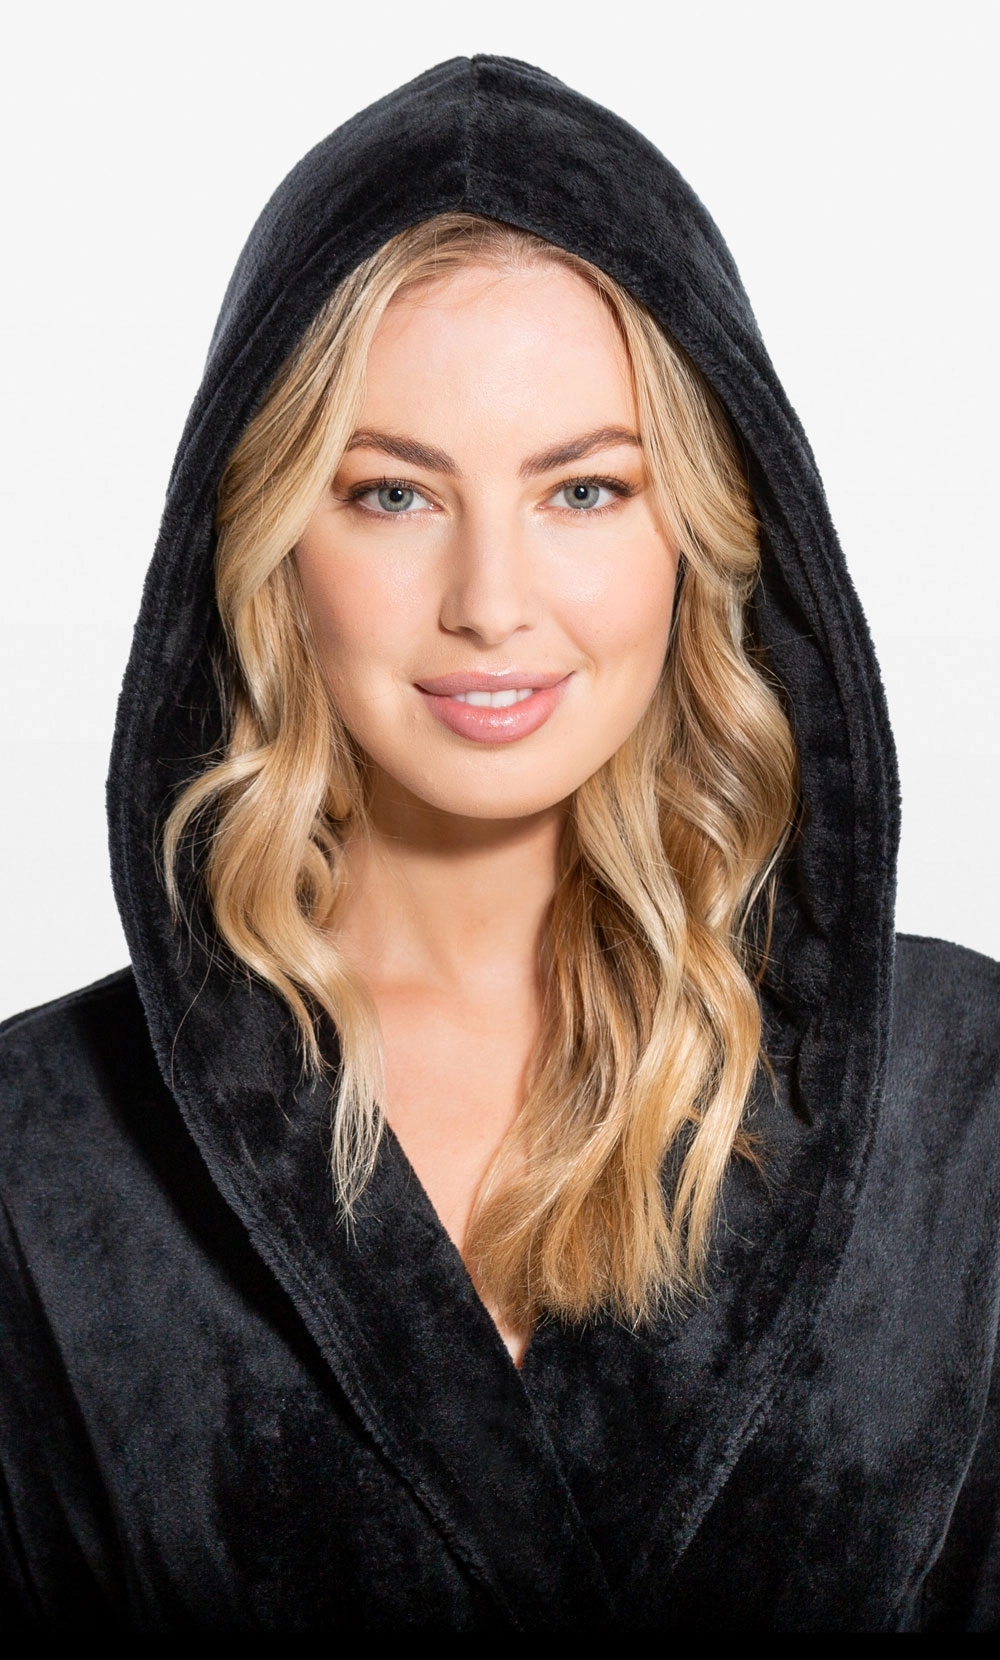 Luxury Bathrobes :: Plush Robes :: Super Soft Black Plush Hooded Women's  Robe - Wholesale bathrobes, Spa robes, Kids robes, Cotton robes, Spa  Slippers, Wholesale Towels